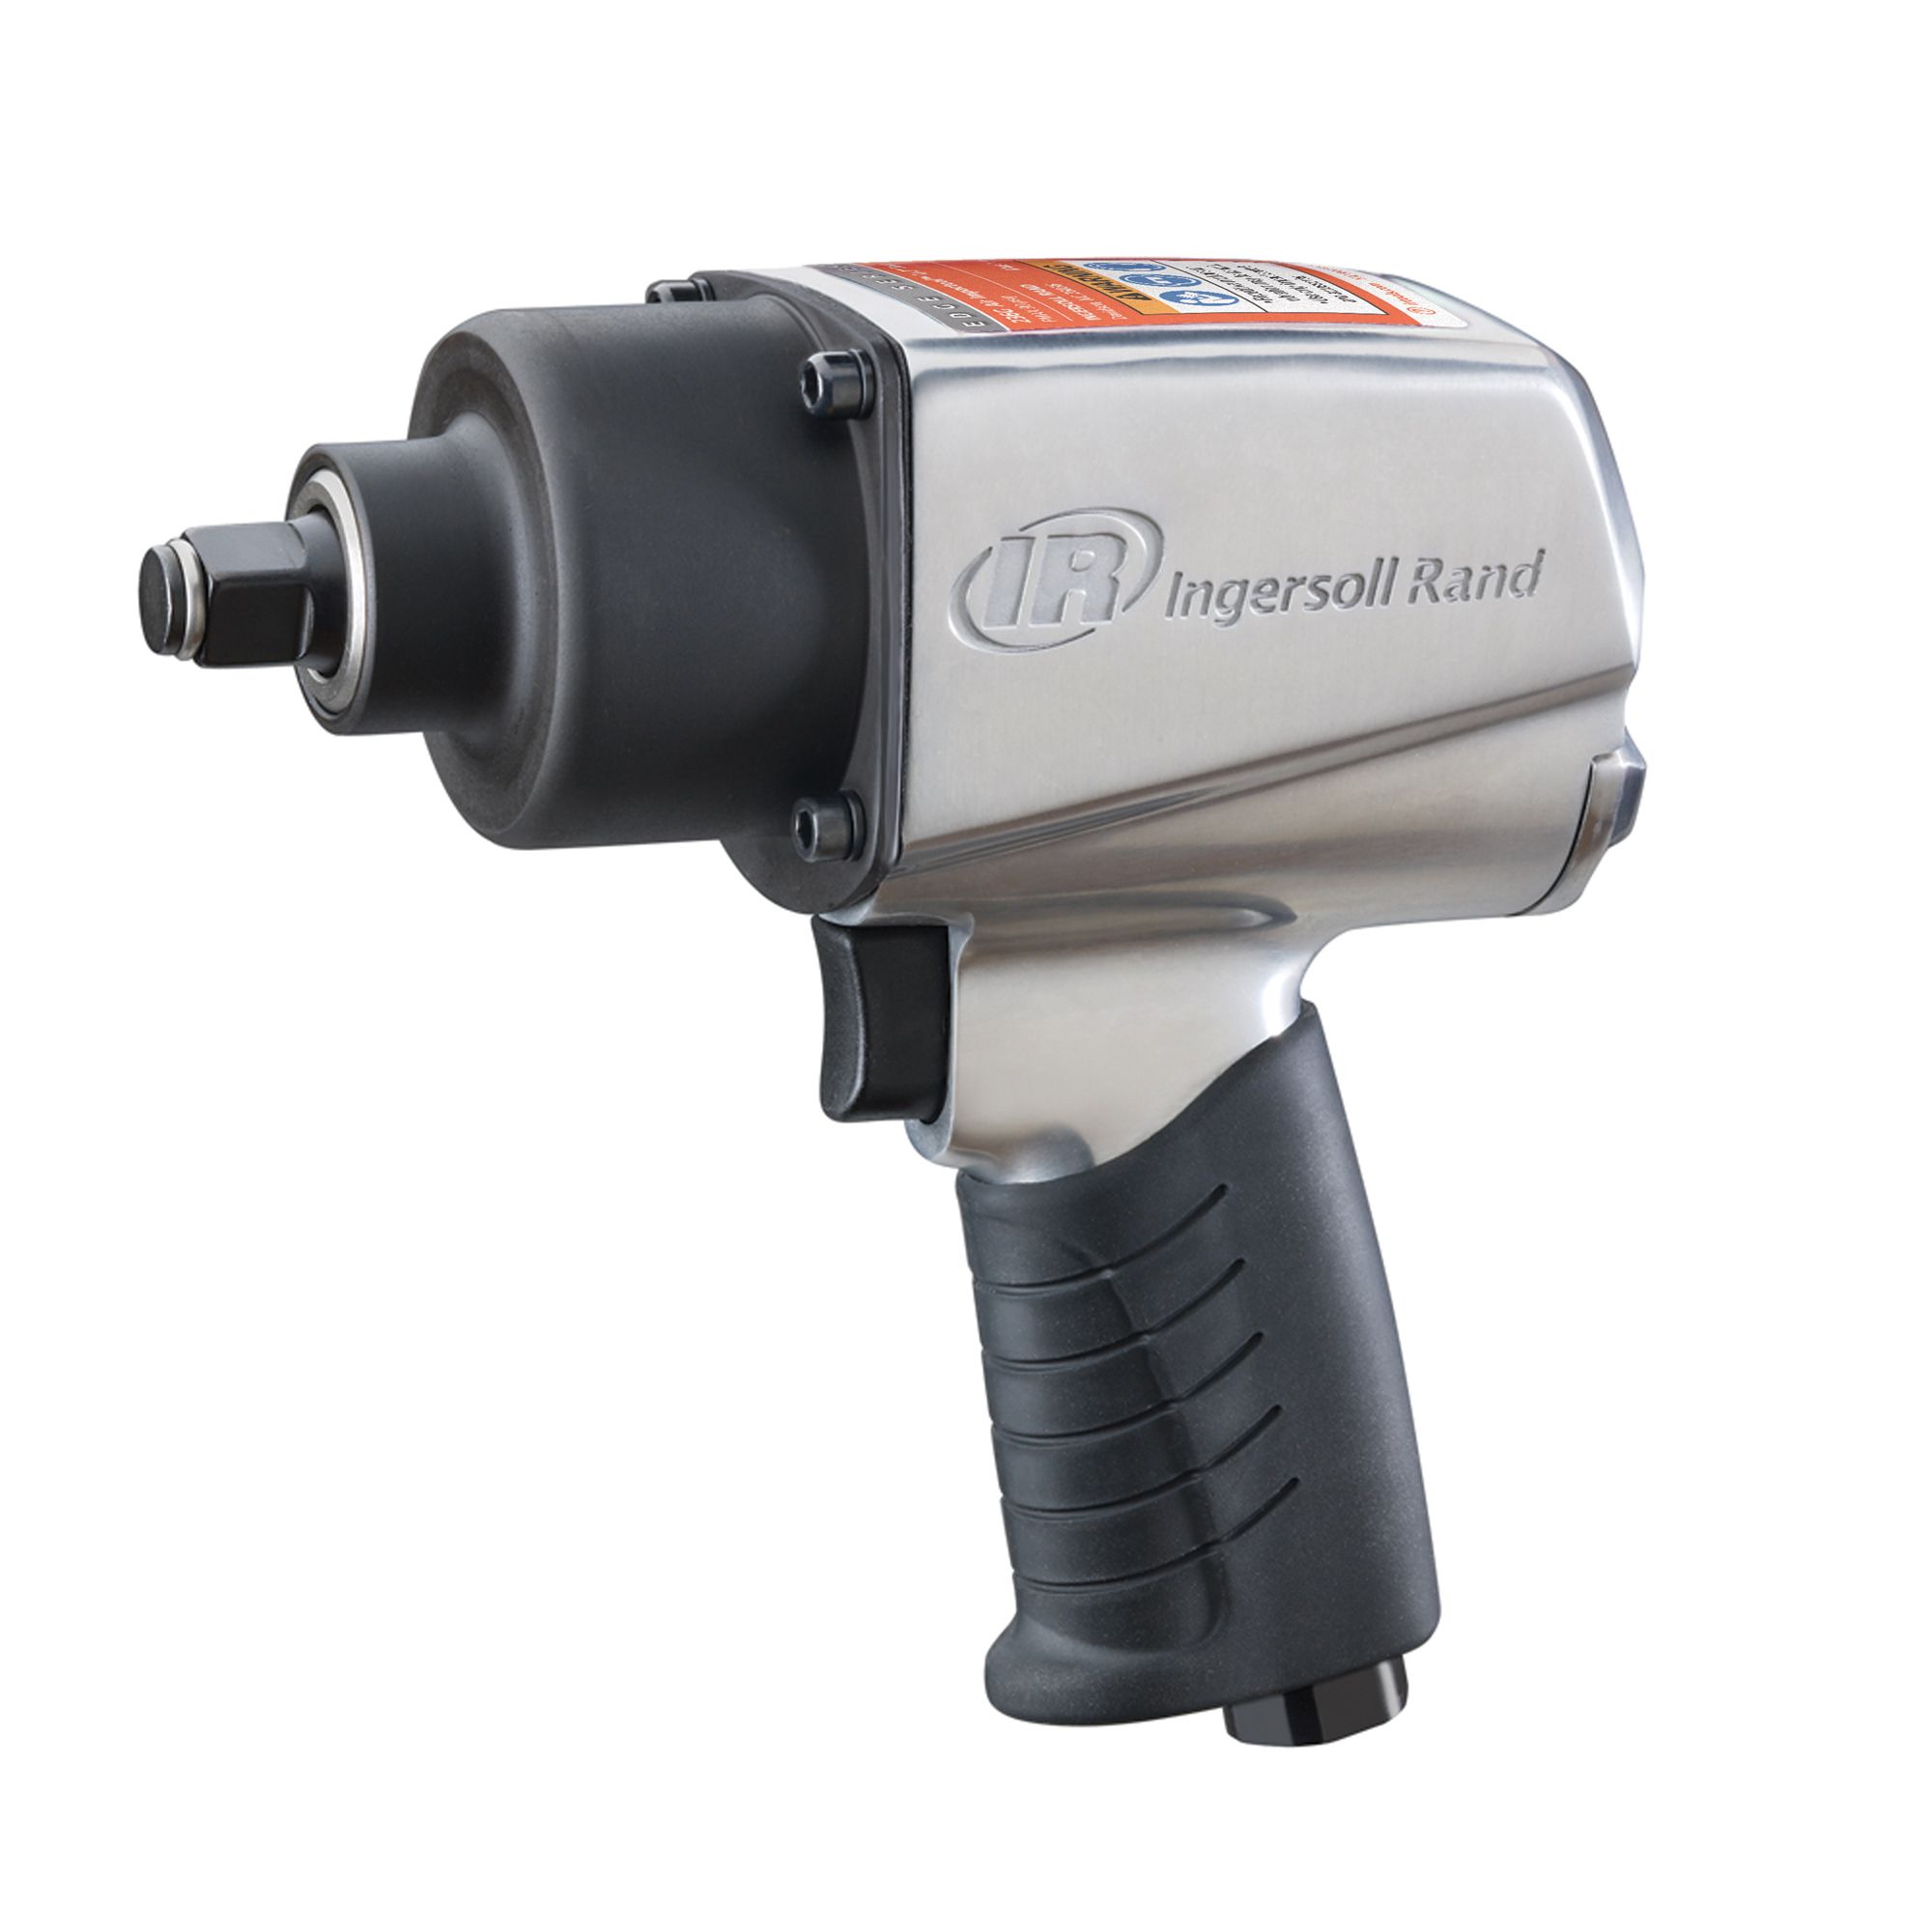 Ingersoll Rand 1/2 in. Impactool&trade;